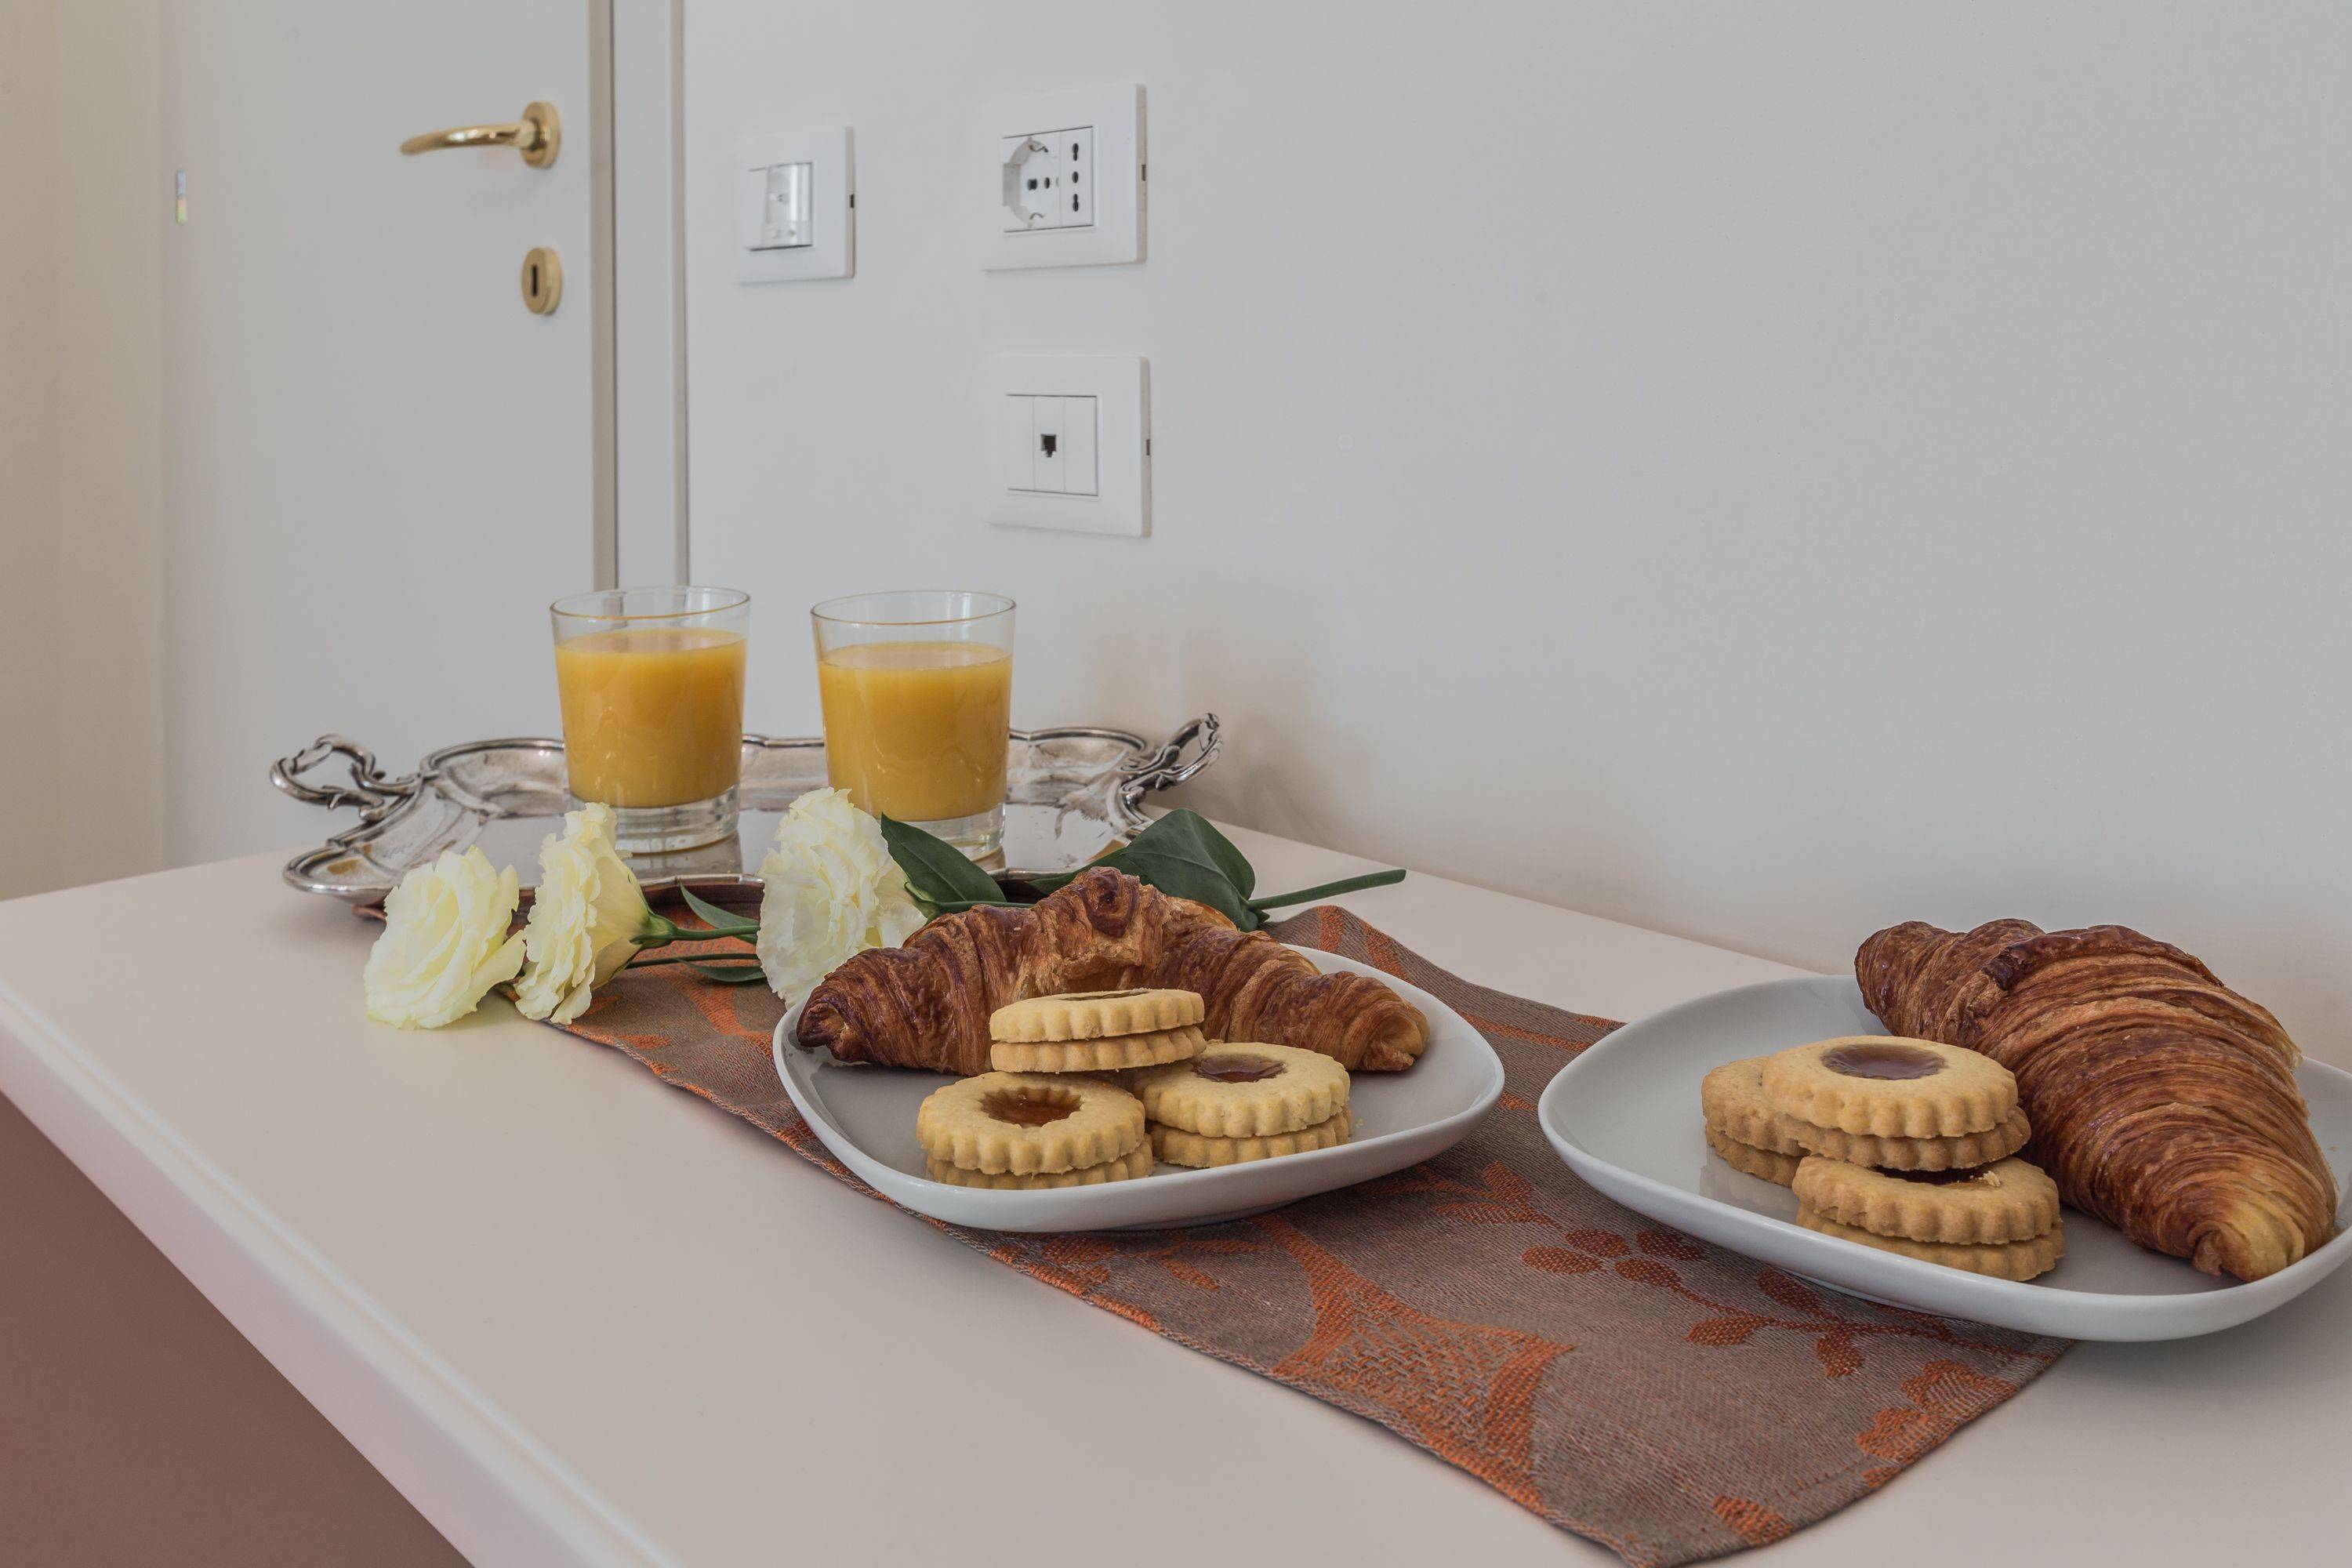 enjoy having breakfast in the bedroom, downstairs you can find exquisite cafés and groceries!